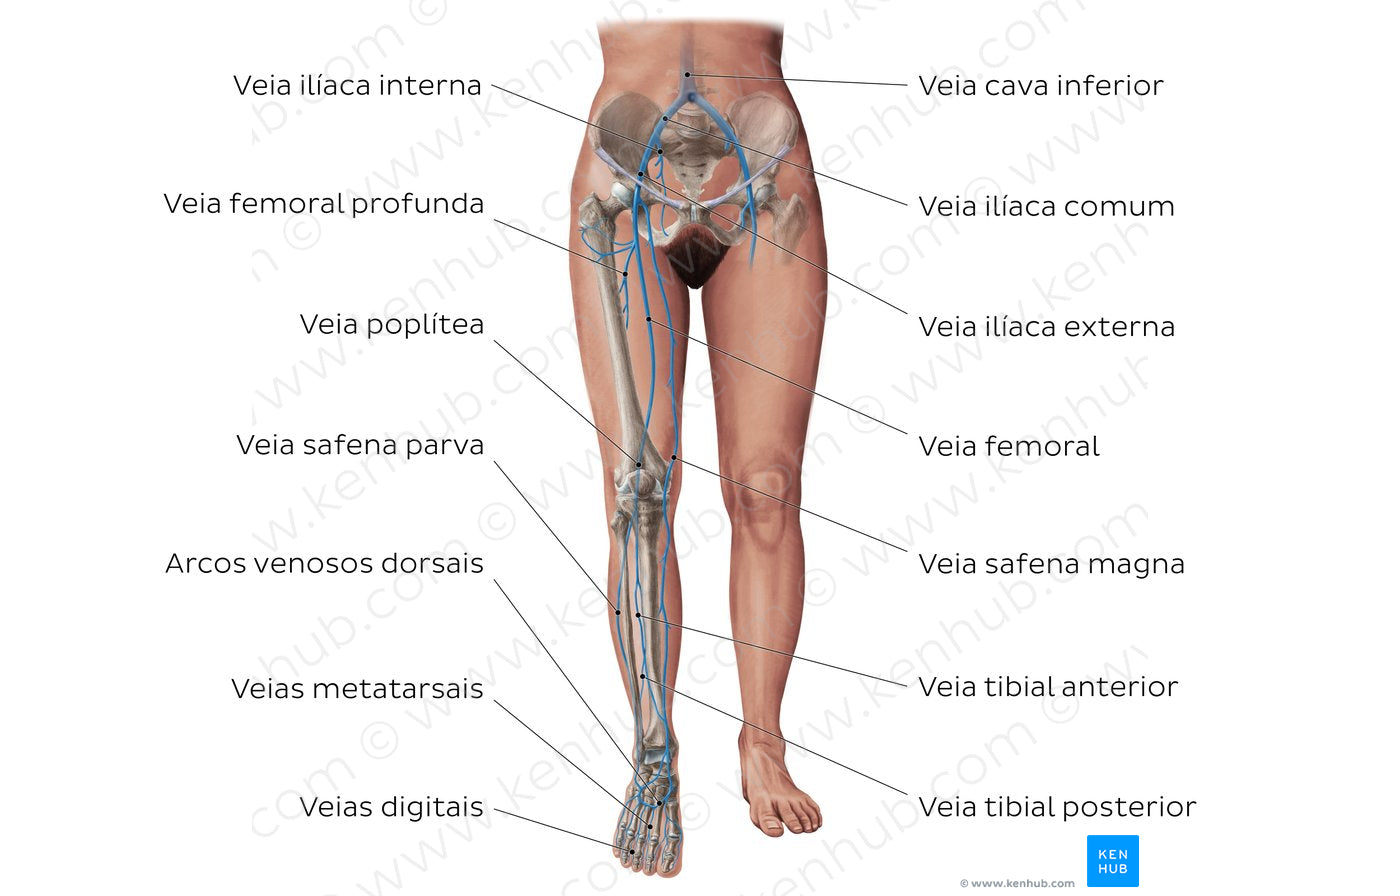 Main veins of the lower limb (Portuguese)